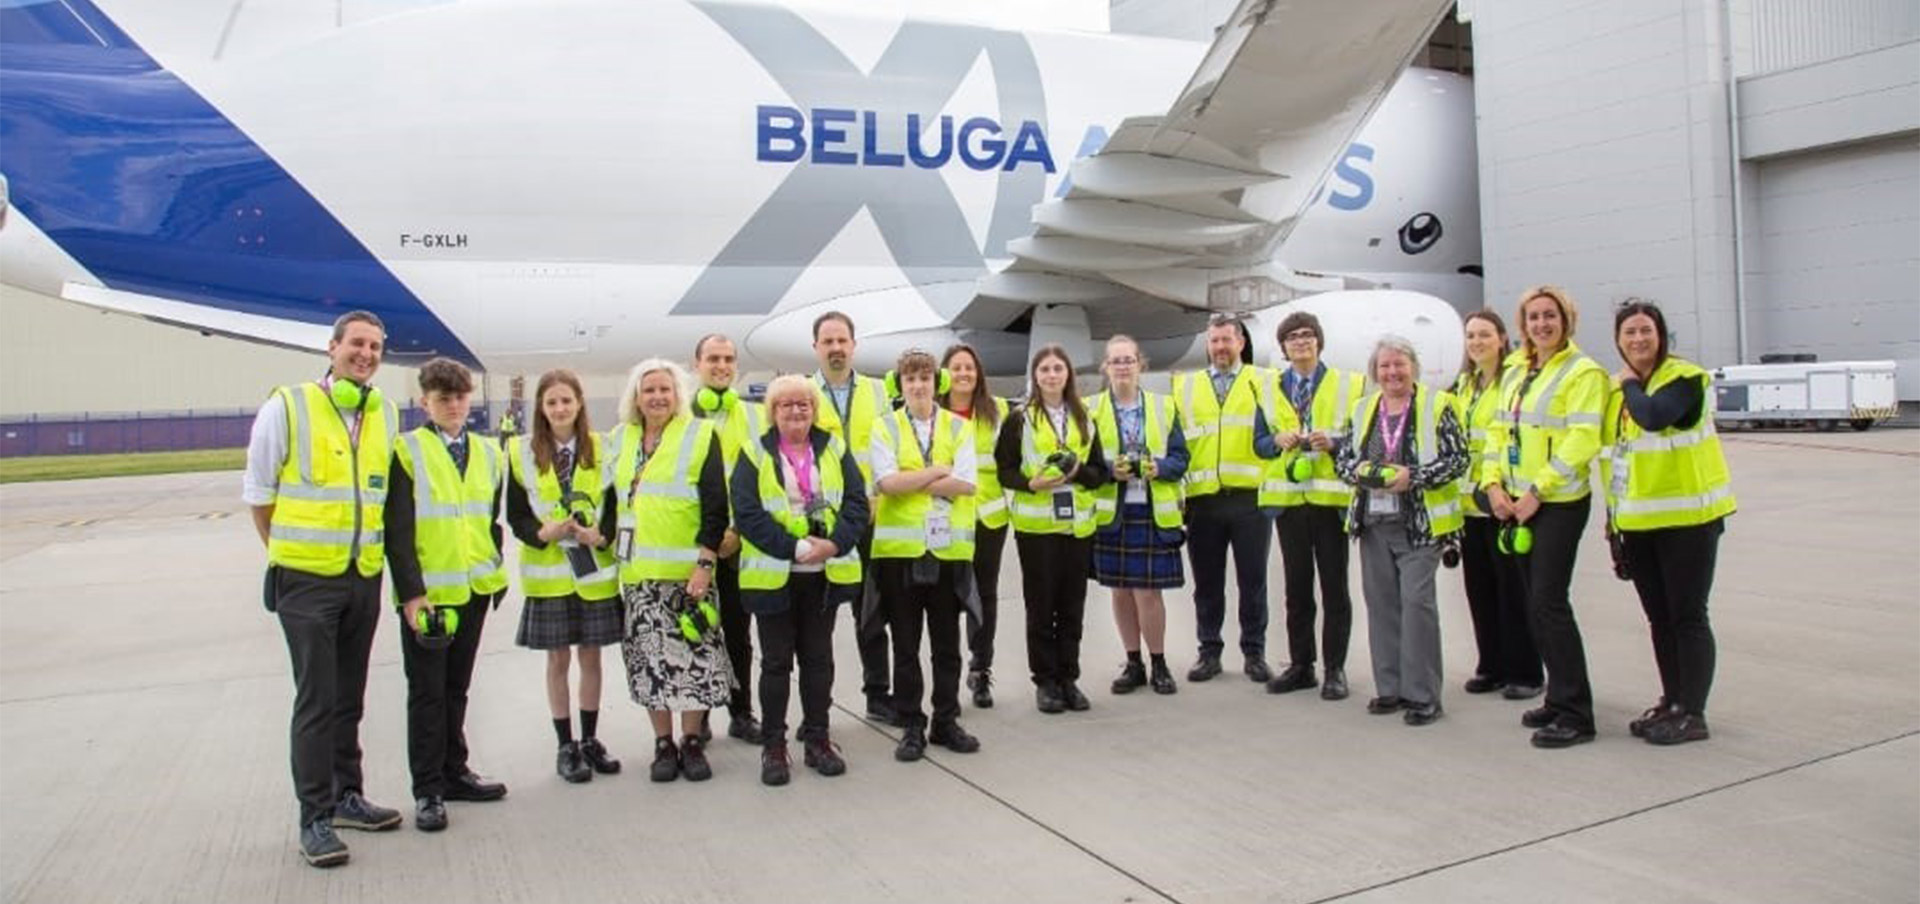 Airbus staff and pupils standing in front of an aeroplane